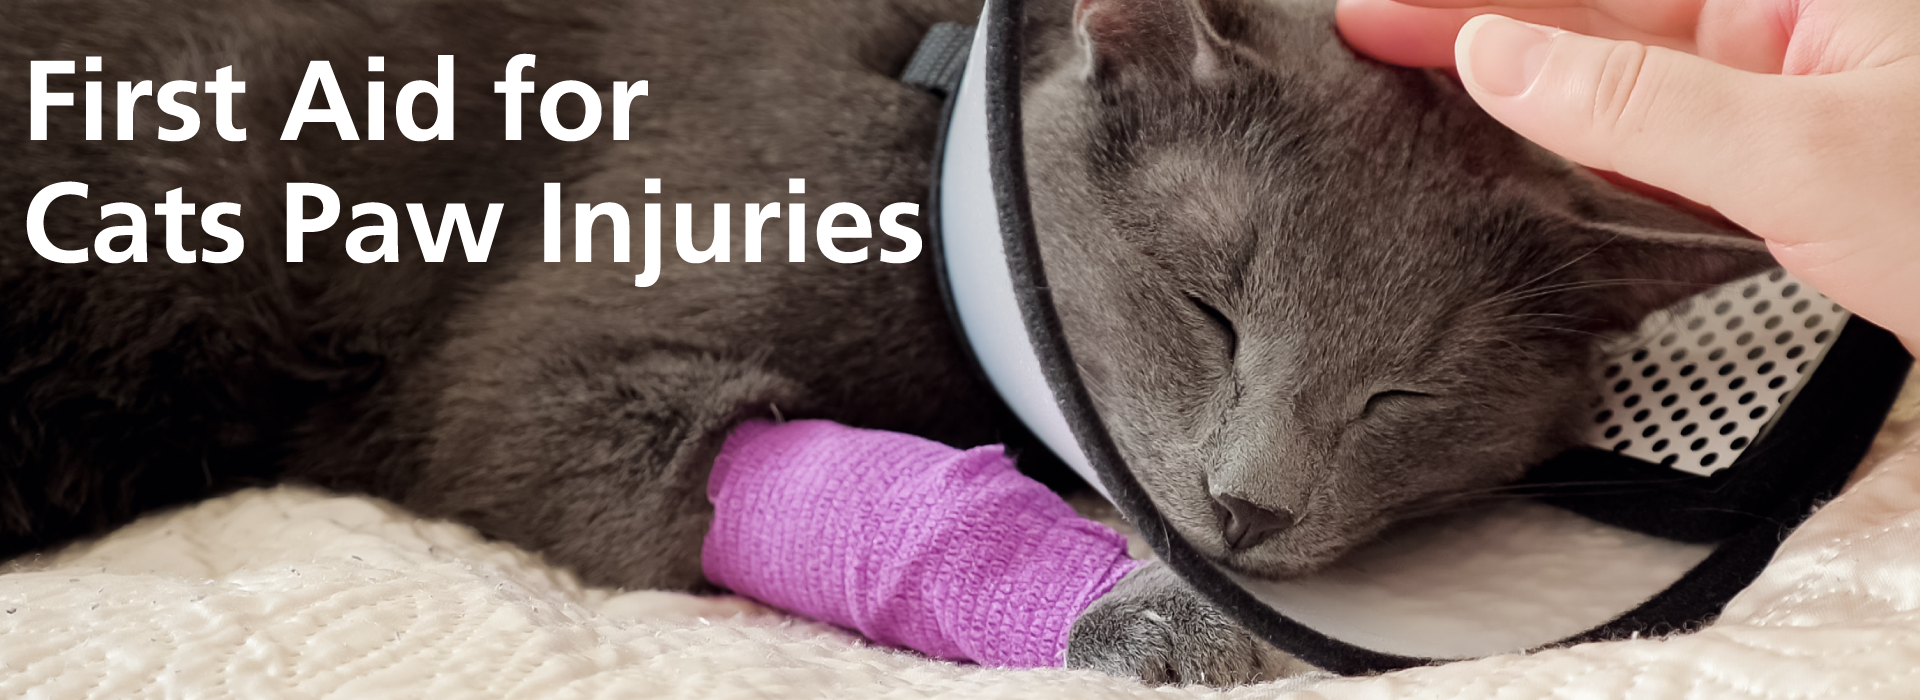 Cat first aid - First aid for cats paw injuries